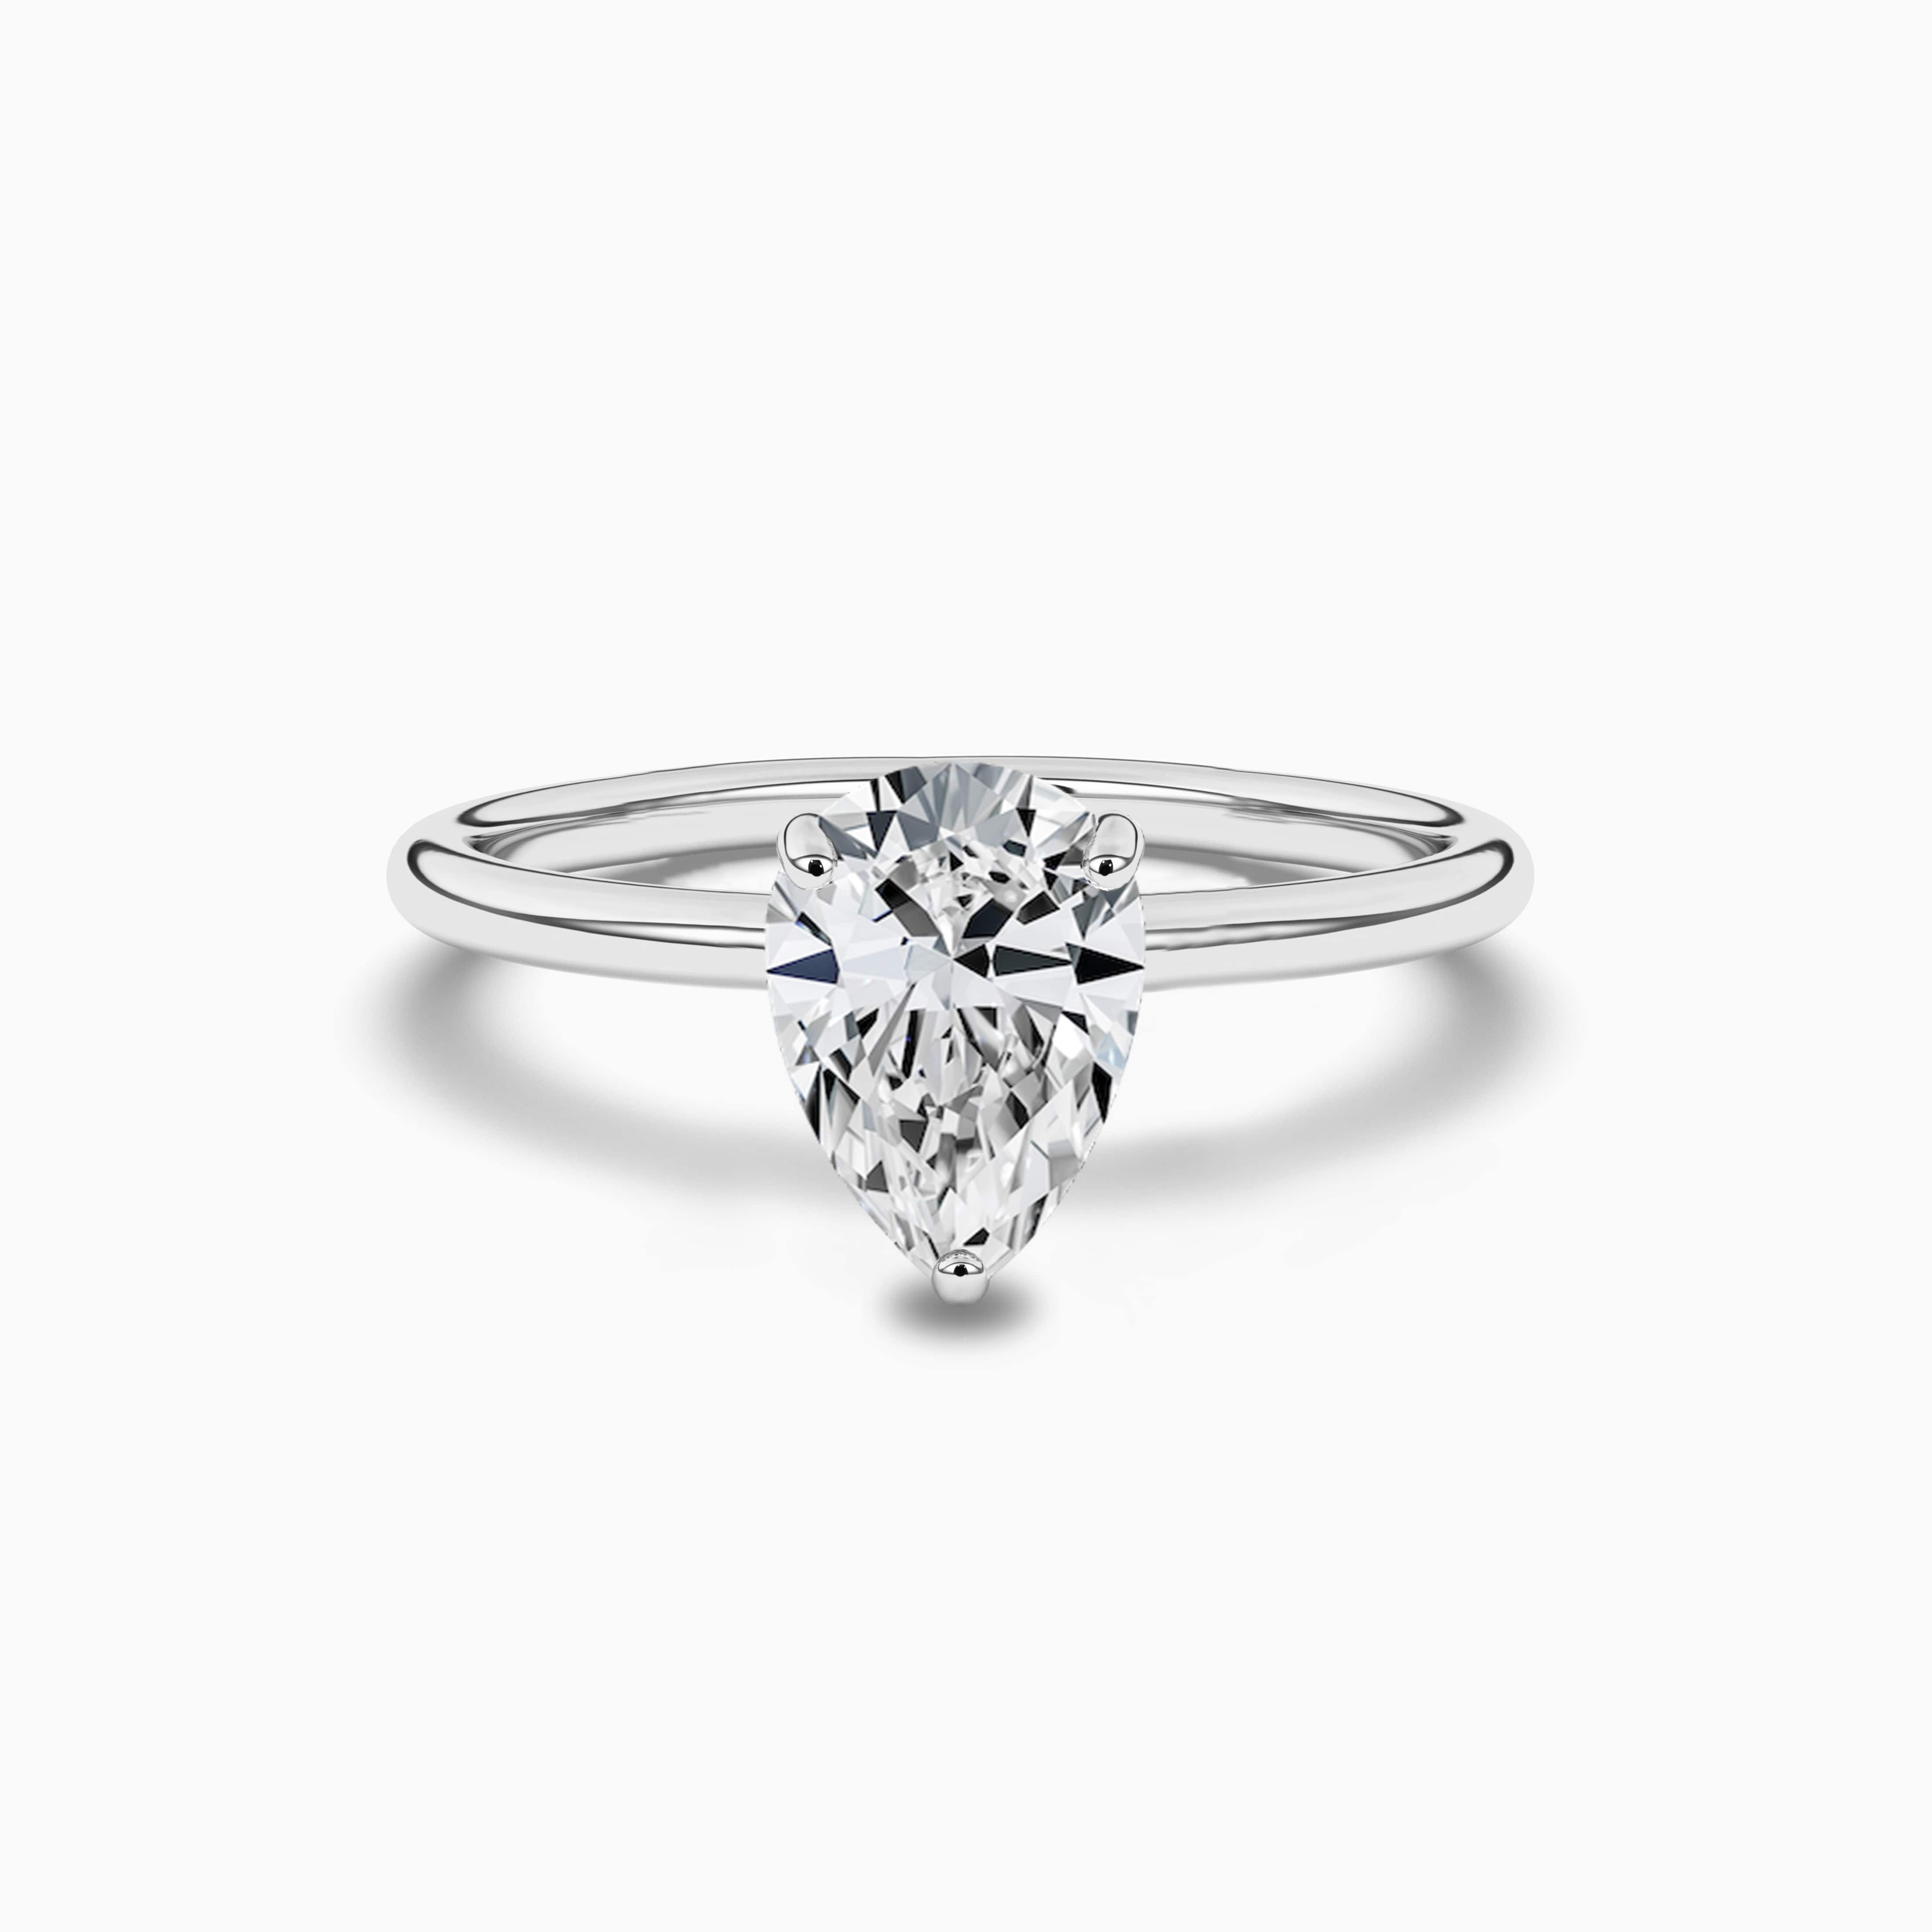 2ct Pear engagement ring